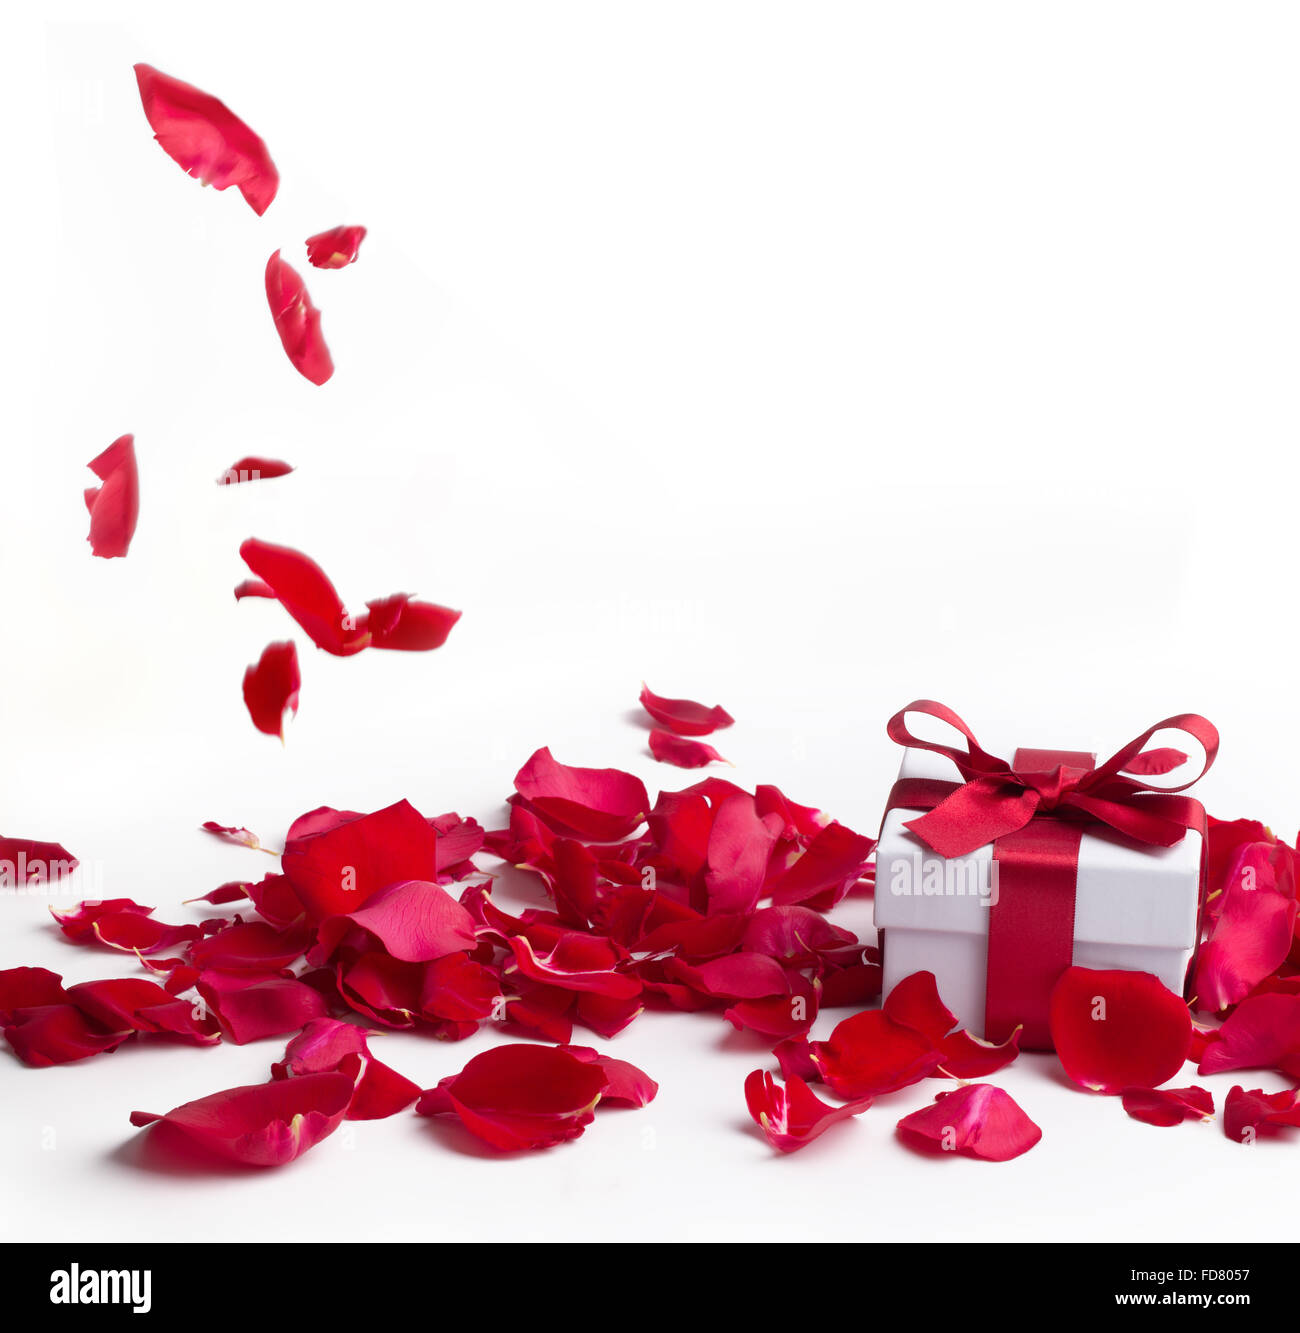 Red roses and gift box on white background,Valentines day concept. Stock Photo